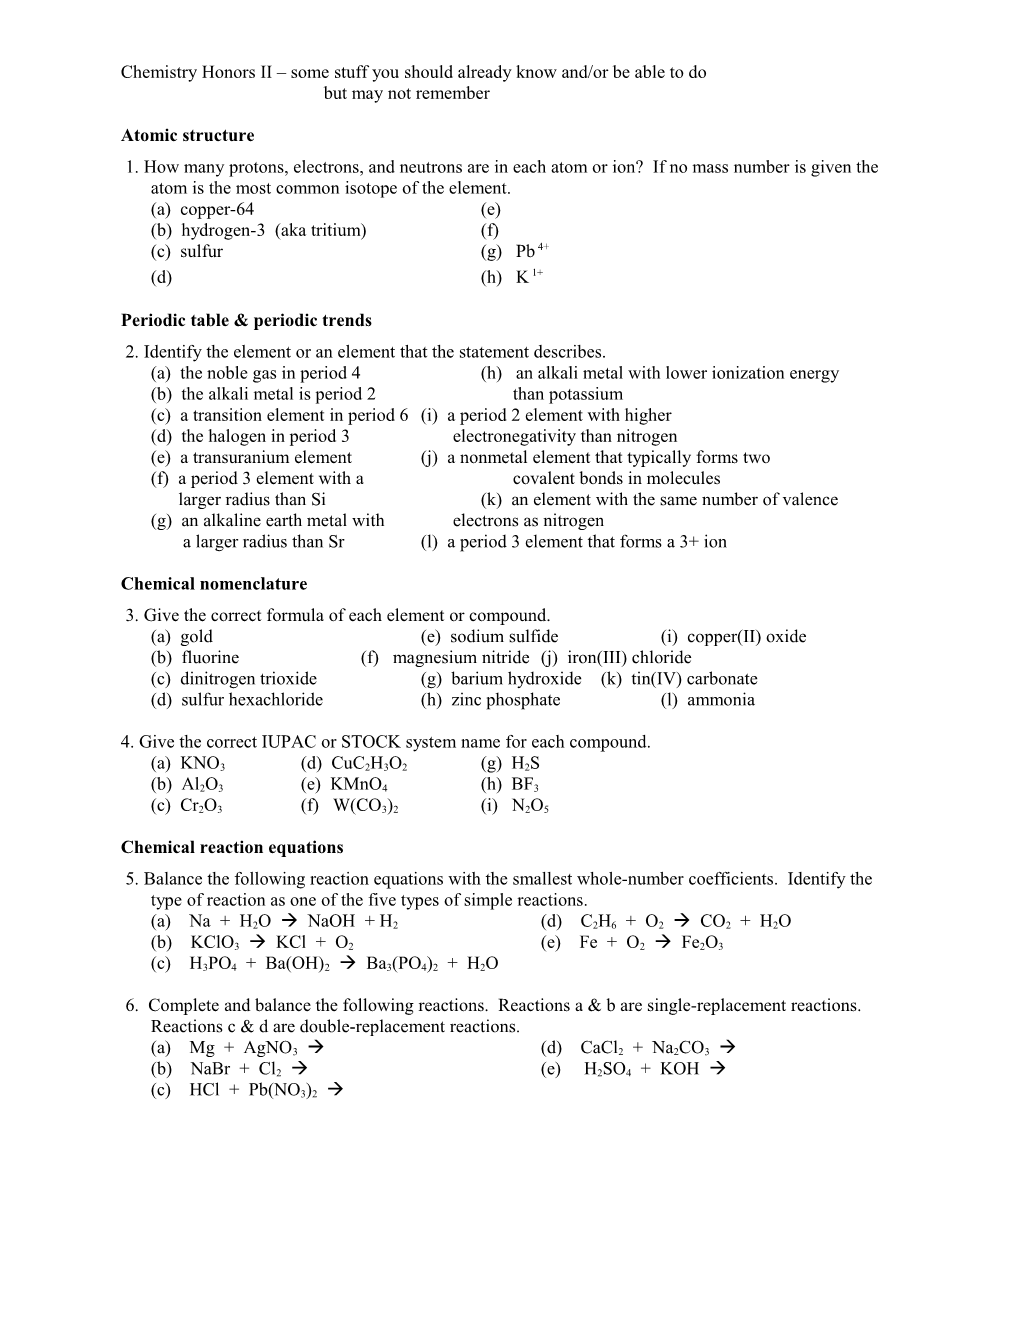 Chemistry Honors II Some Stuff You Should Already Know And/Or Be Able to Do